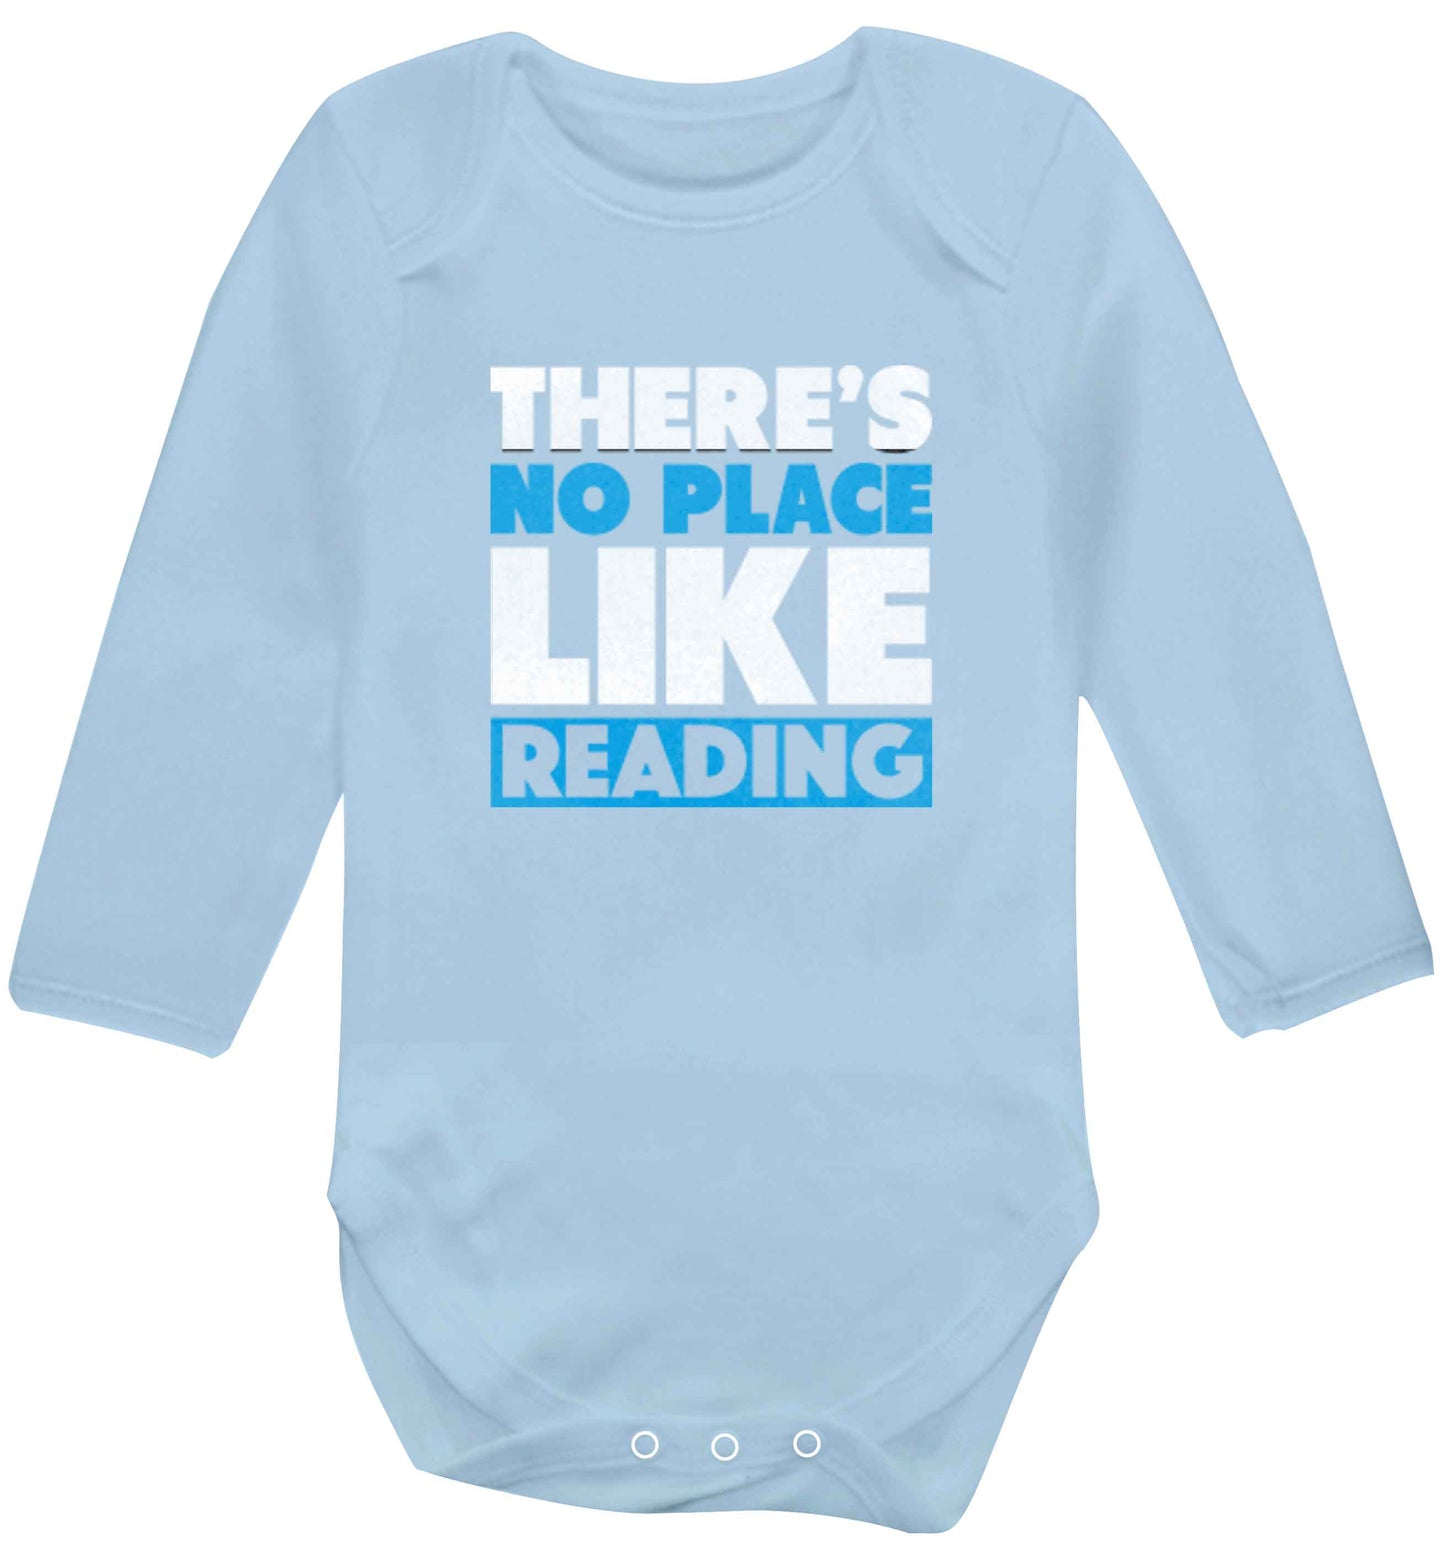 There's no place like Readingbaby vest long sleeved pale blue 6-12 months